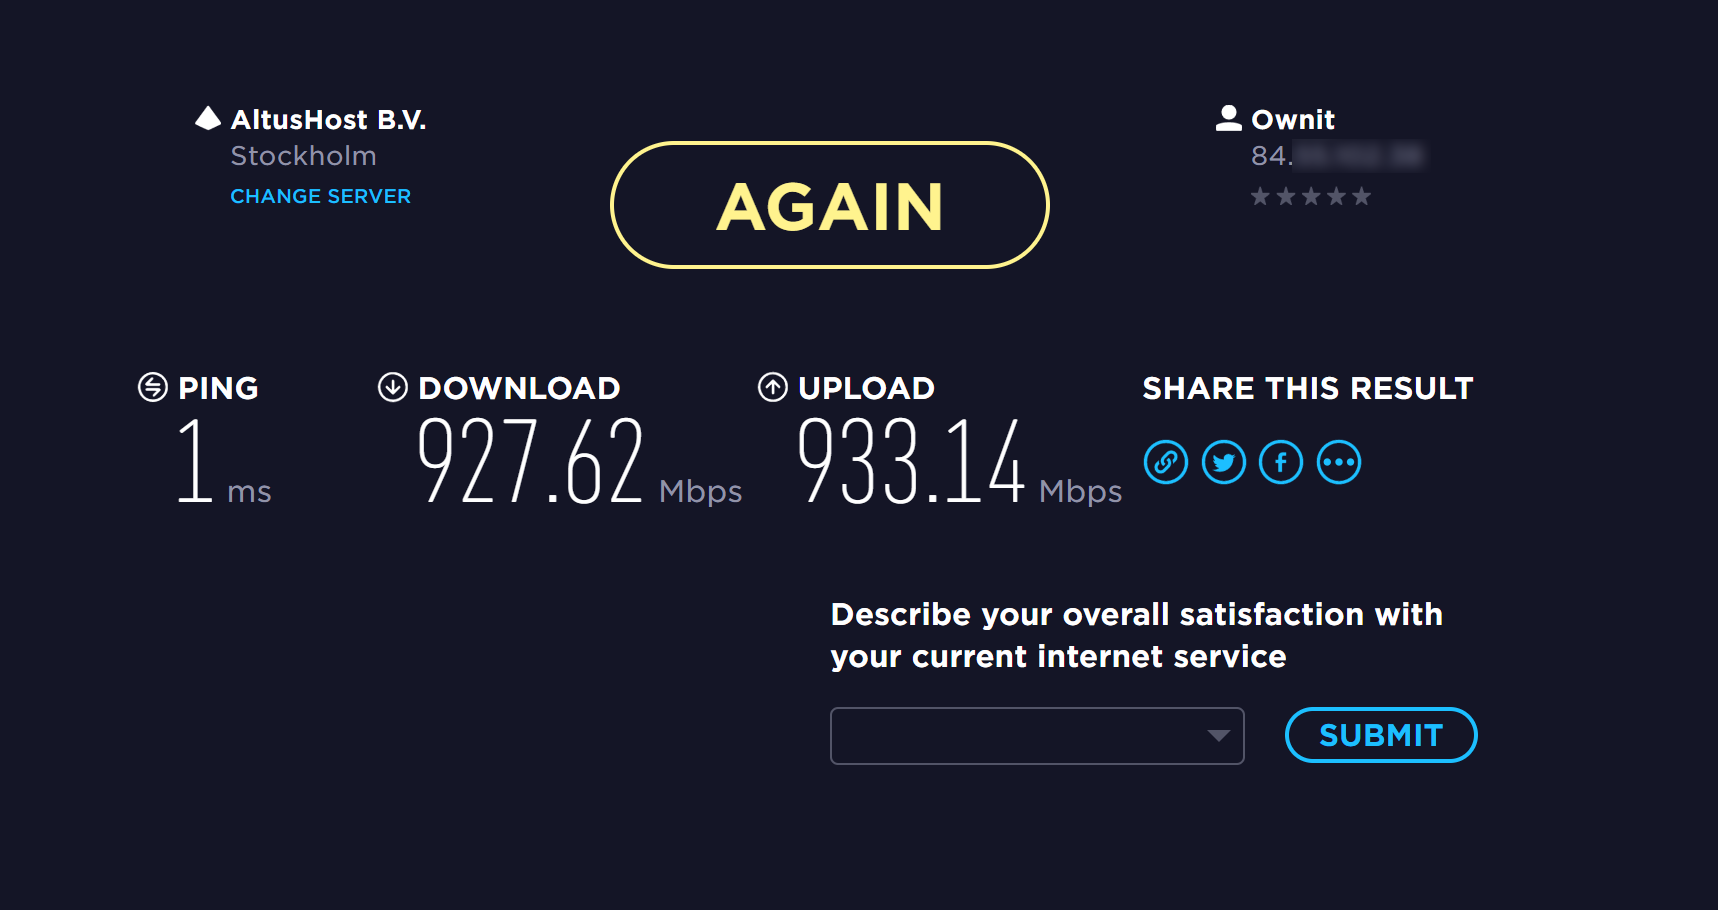 what is a good download speed test result